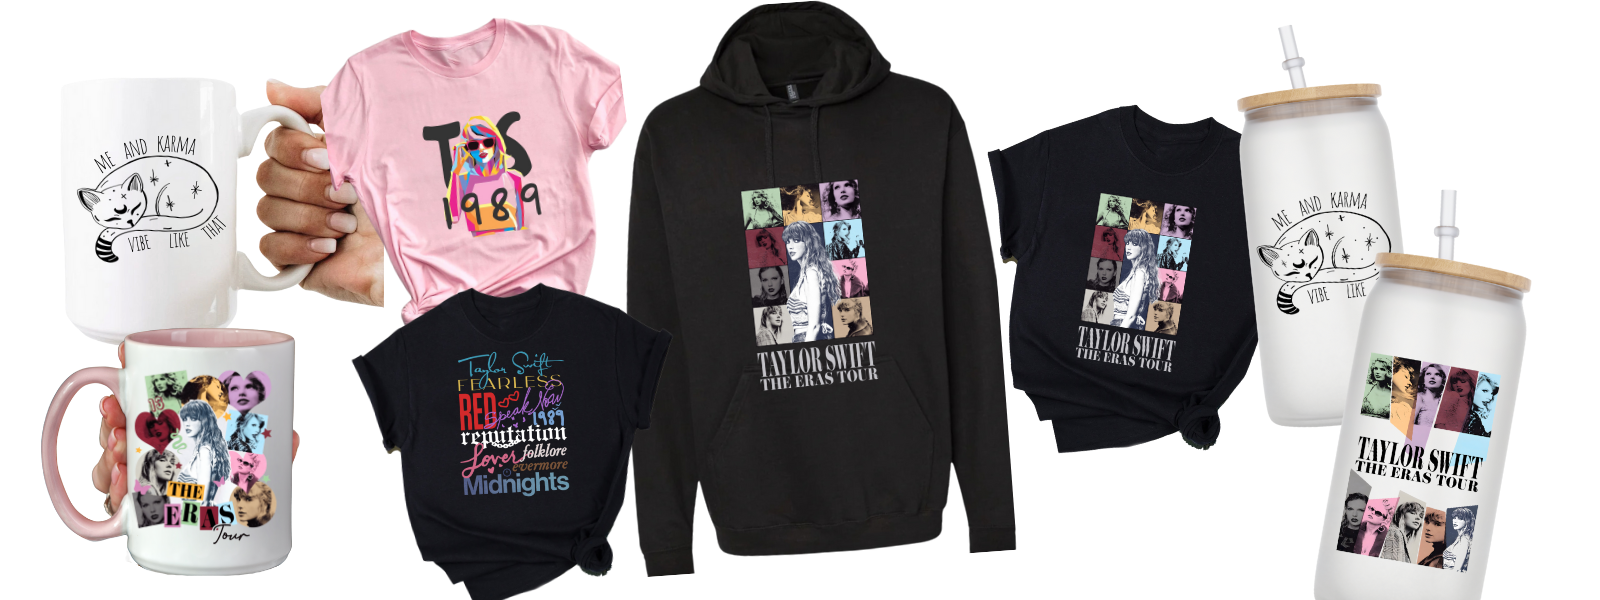 Taylor Swift Shirts, Hoodies and all things merchandise